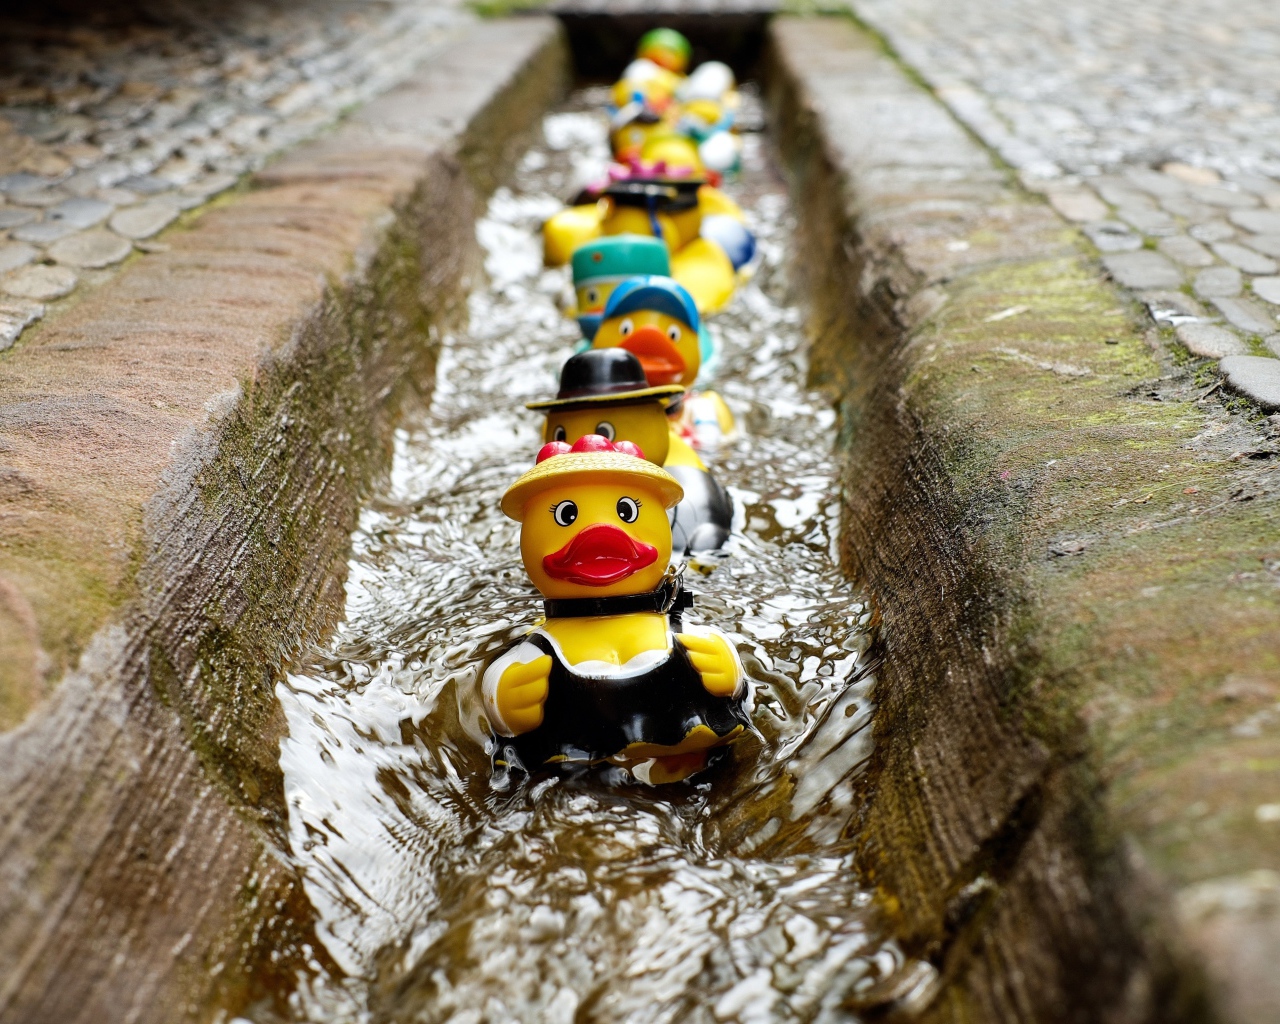 Toys ducklings in the gutter